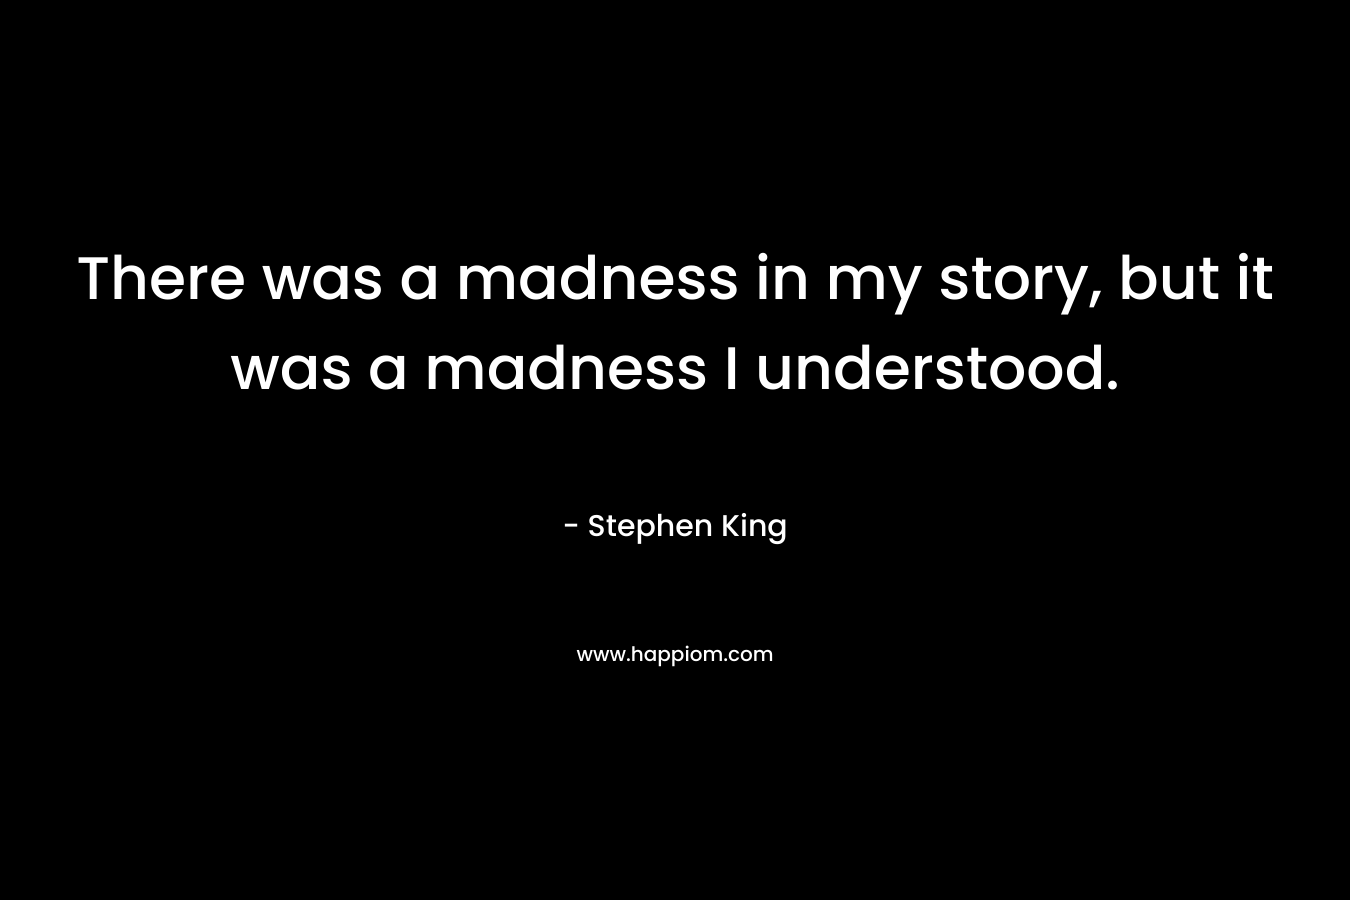 There was a madness in my story, but it was a madness I understood. – Stephen King